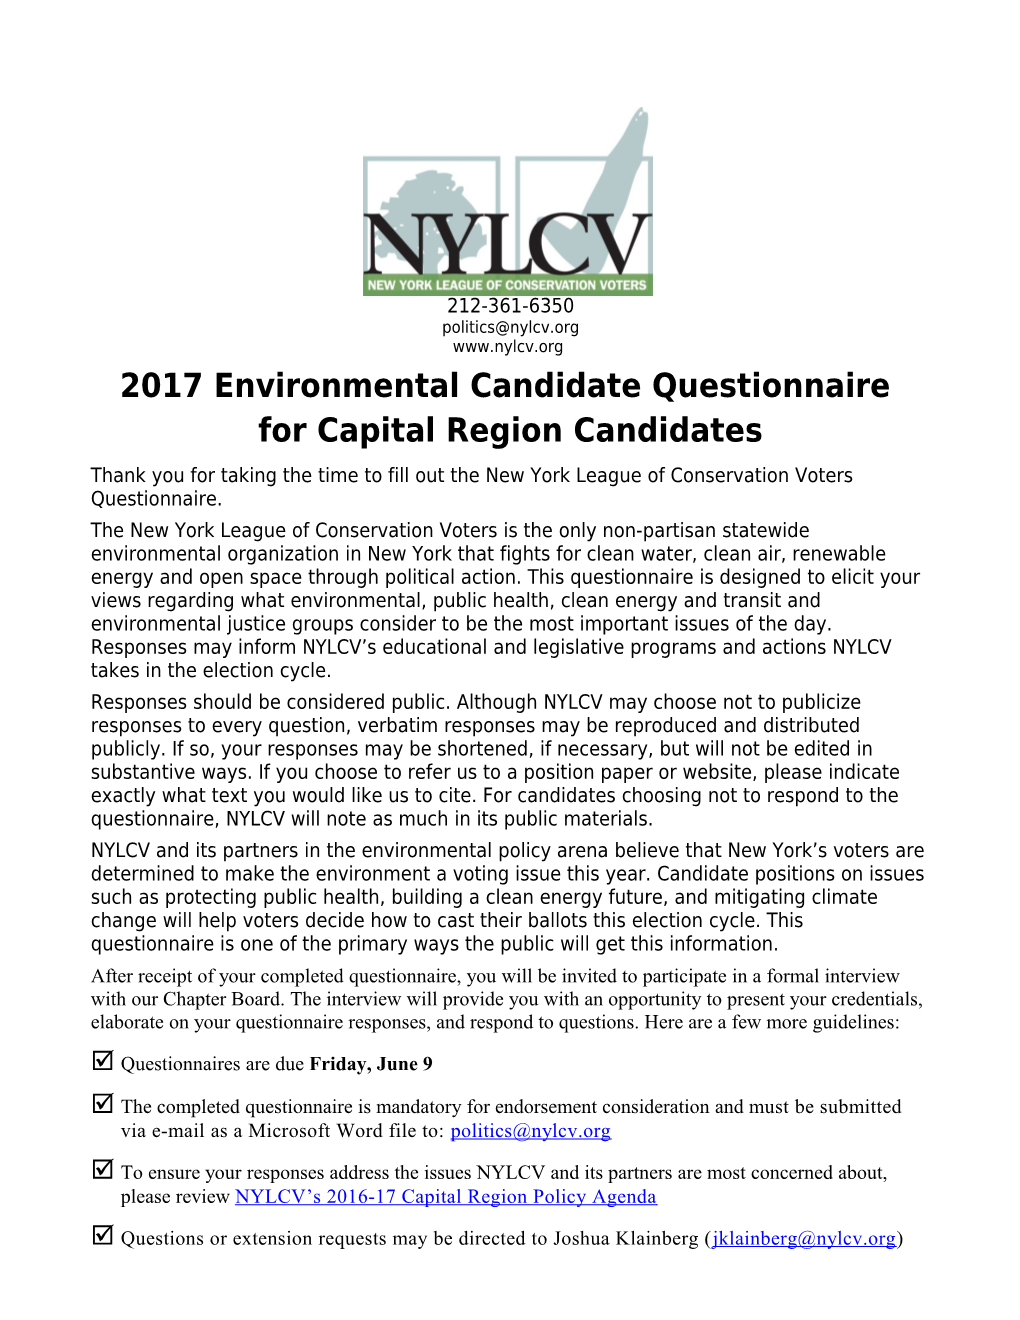 2017 Environmental Candidate Questionnaire for Capital Region Candidates